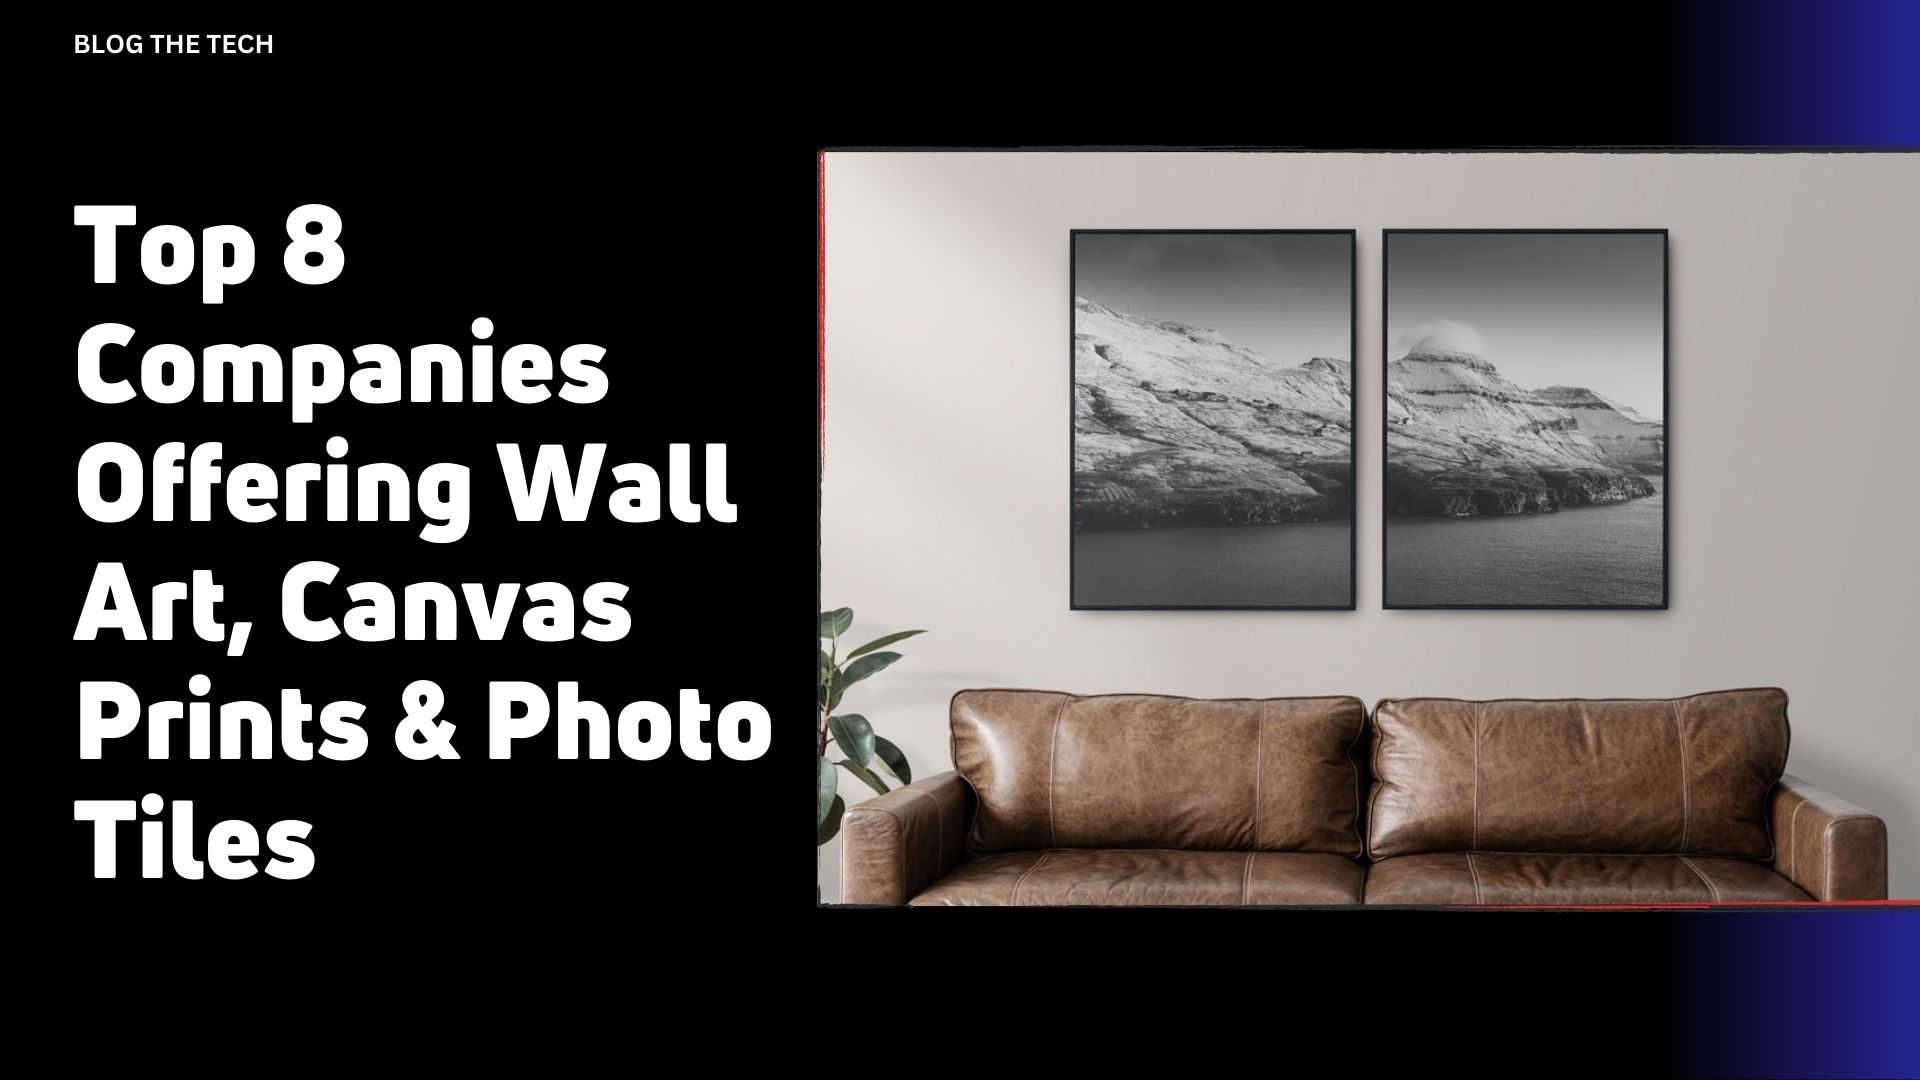 Top 8 Companies Offering Wall Art, Canvas Prints & Photo Tiles